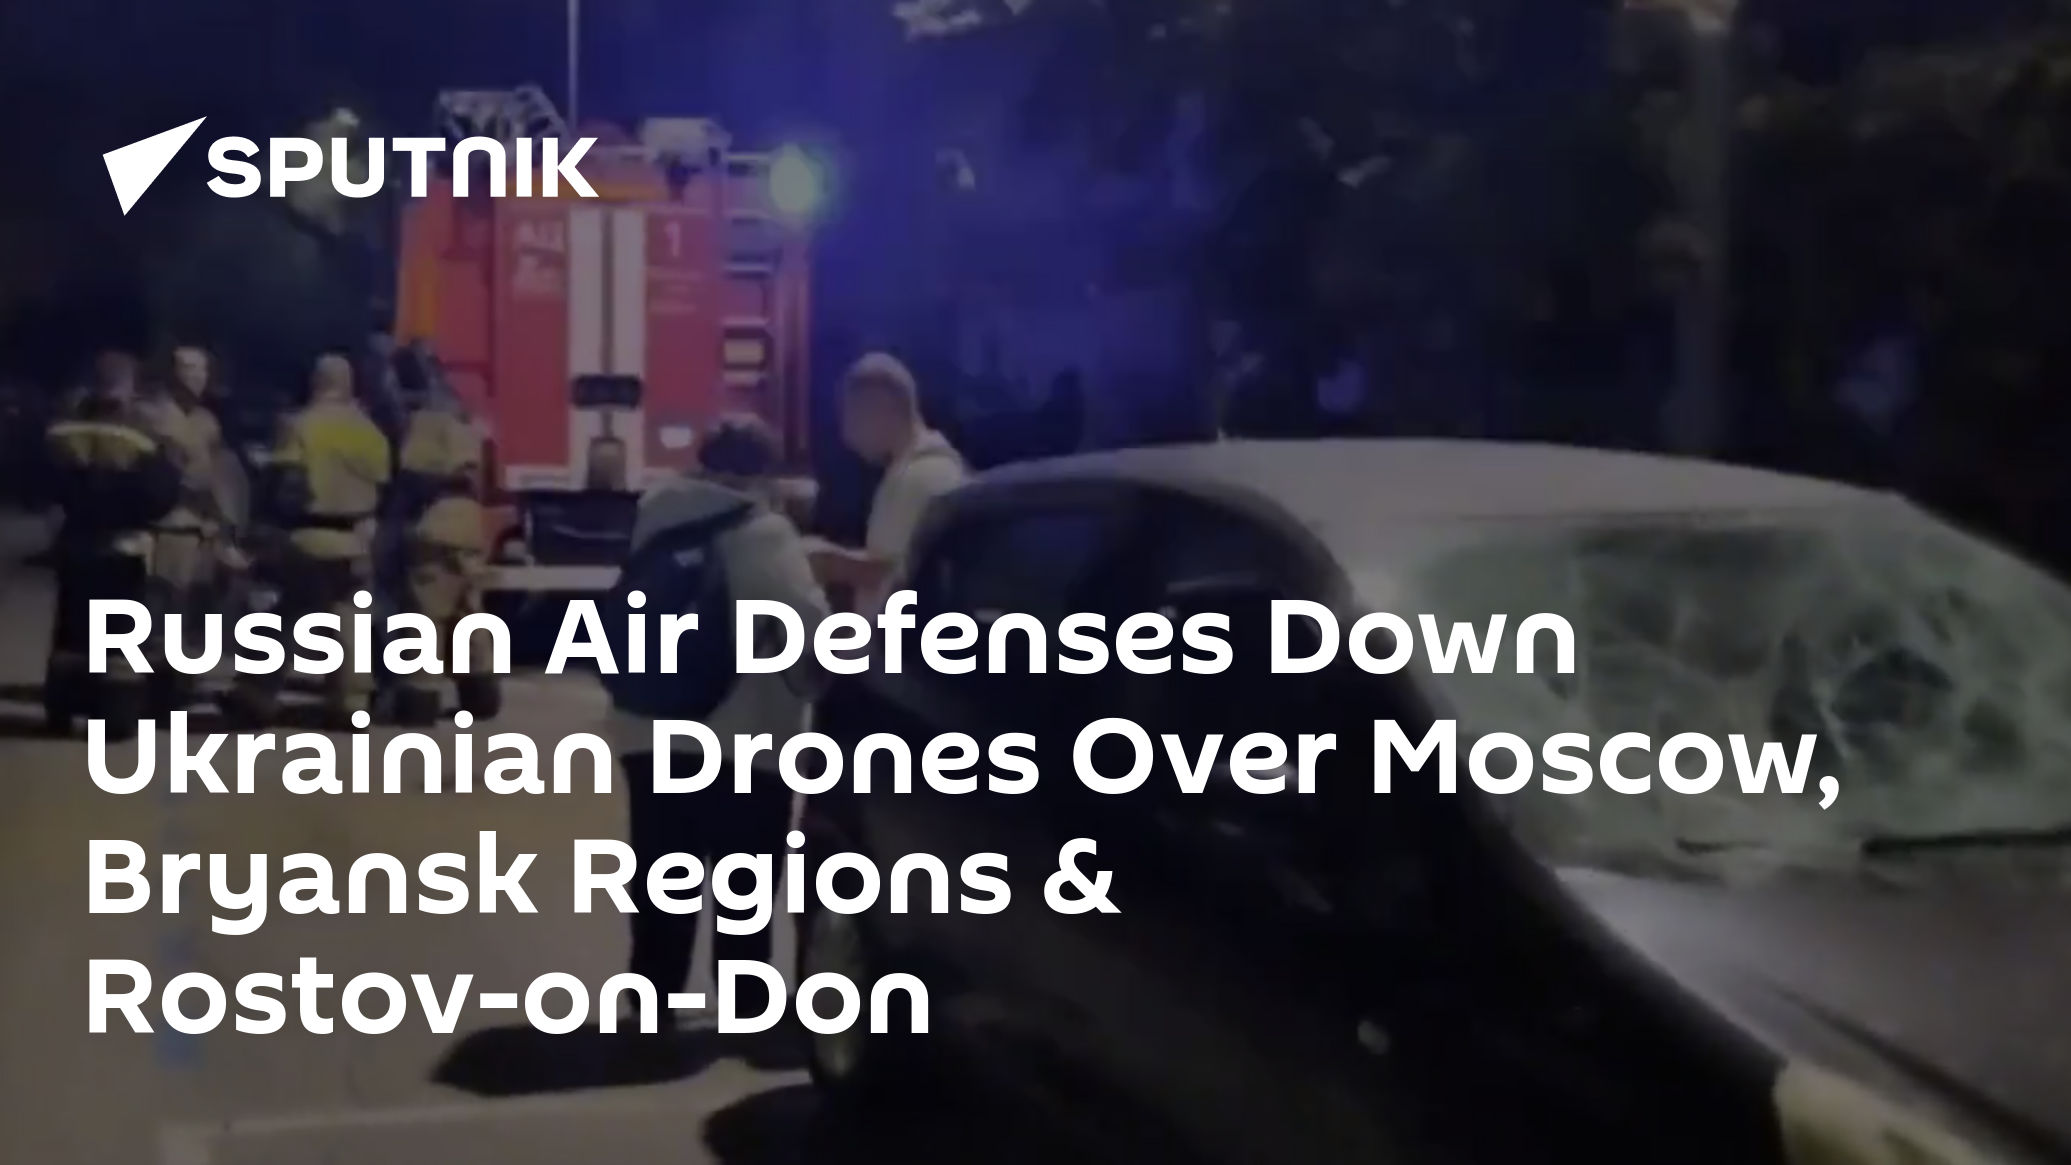 Russian Air Defenses Down Ukraine Drones Over Moscow Region, Rostov-on-Don City